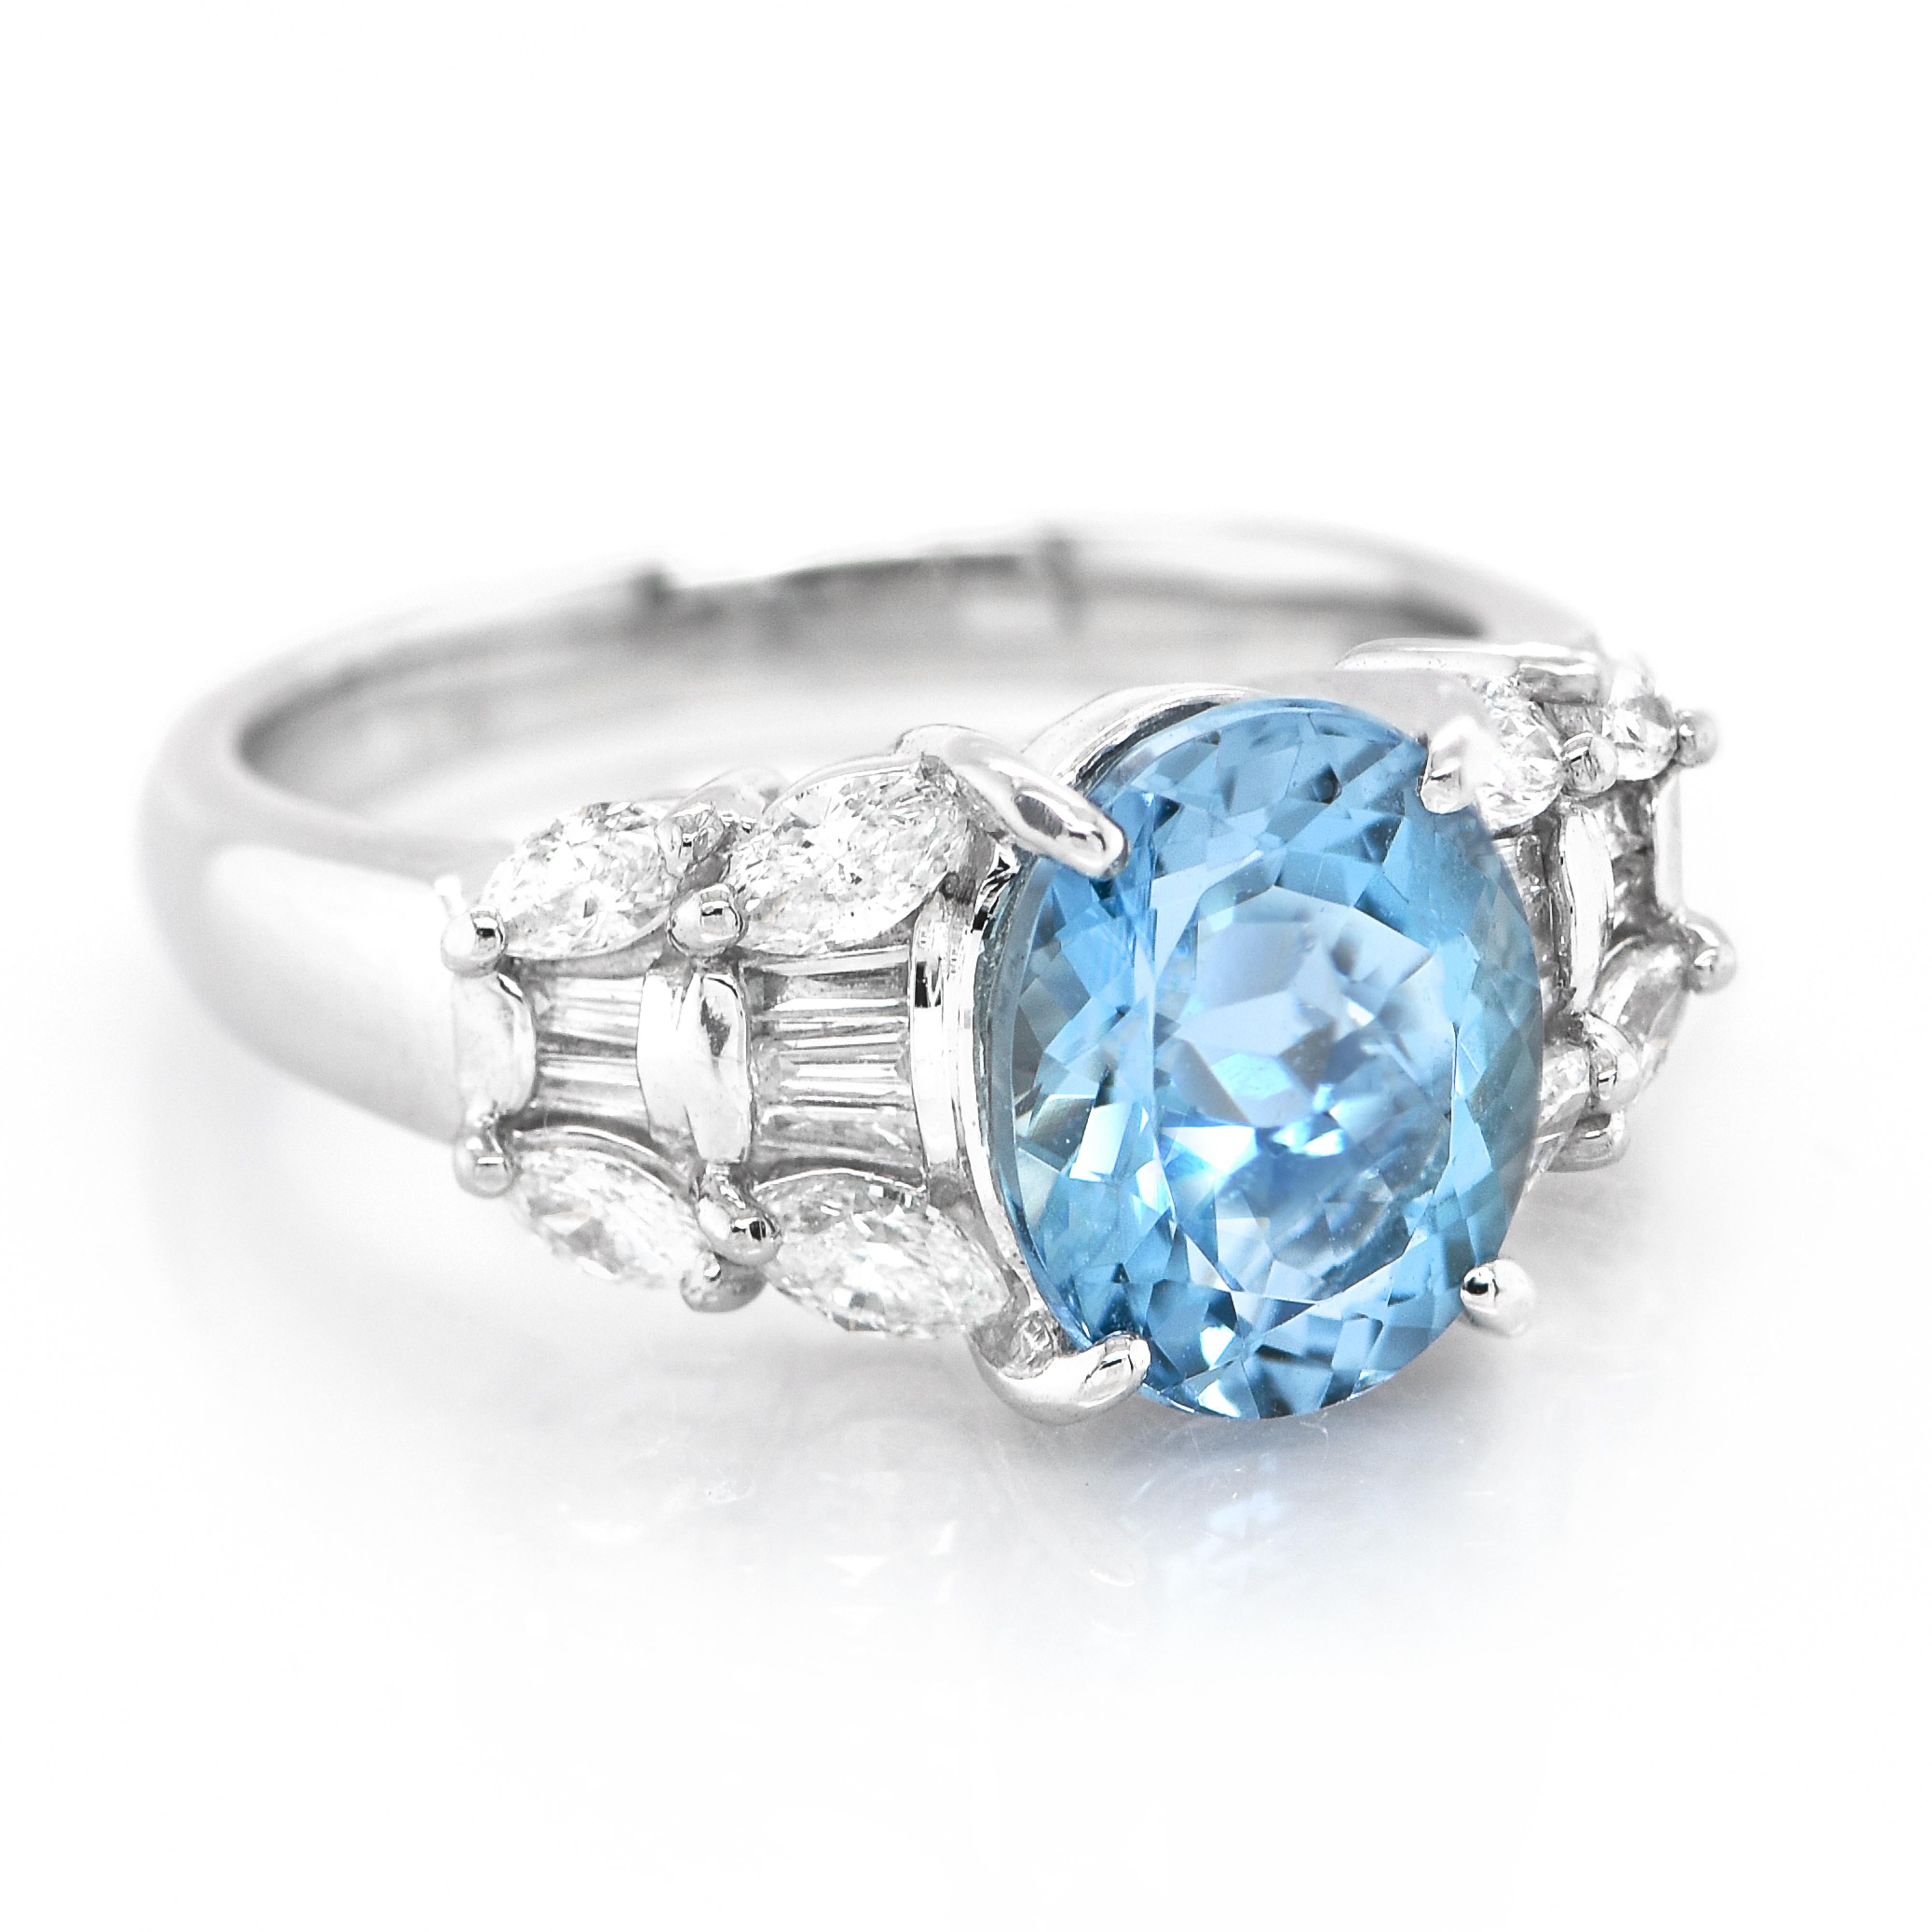 A beautiful Cocktail Ring featuring a 2.50 Carat, Natural, Santa Maria Color Aquamarine and 0.70 Carats of Diamond Accents set in Platinum. Aquamarines have been prized gems throughout human history for their cool blue color. They historically come